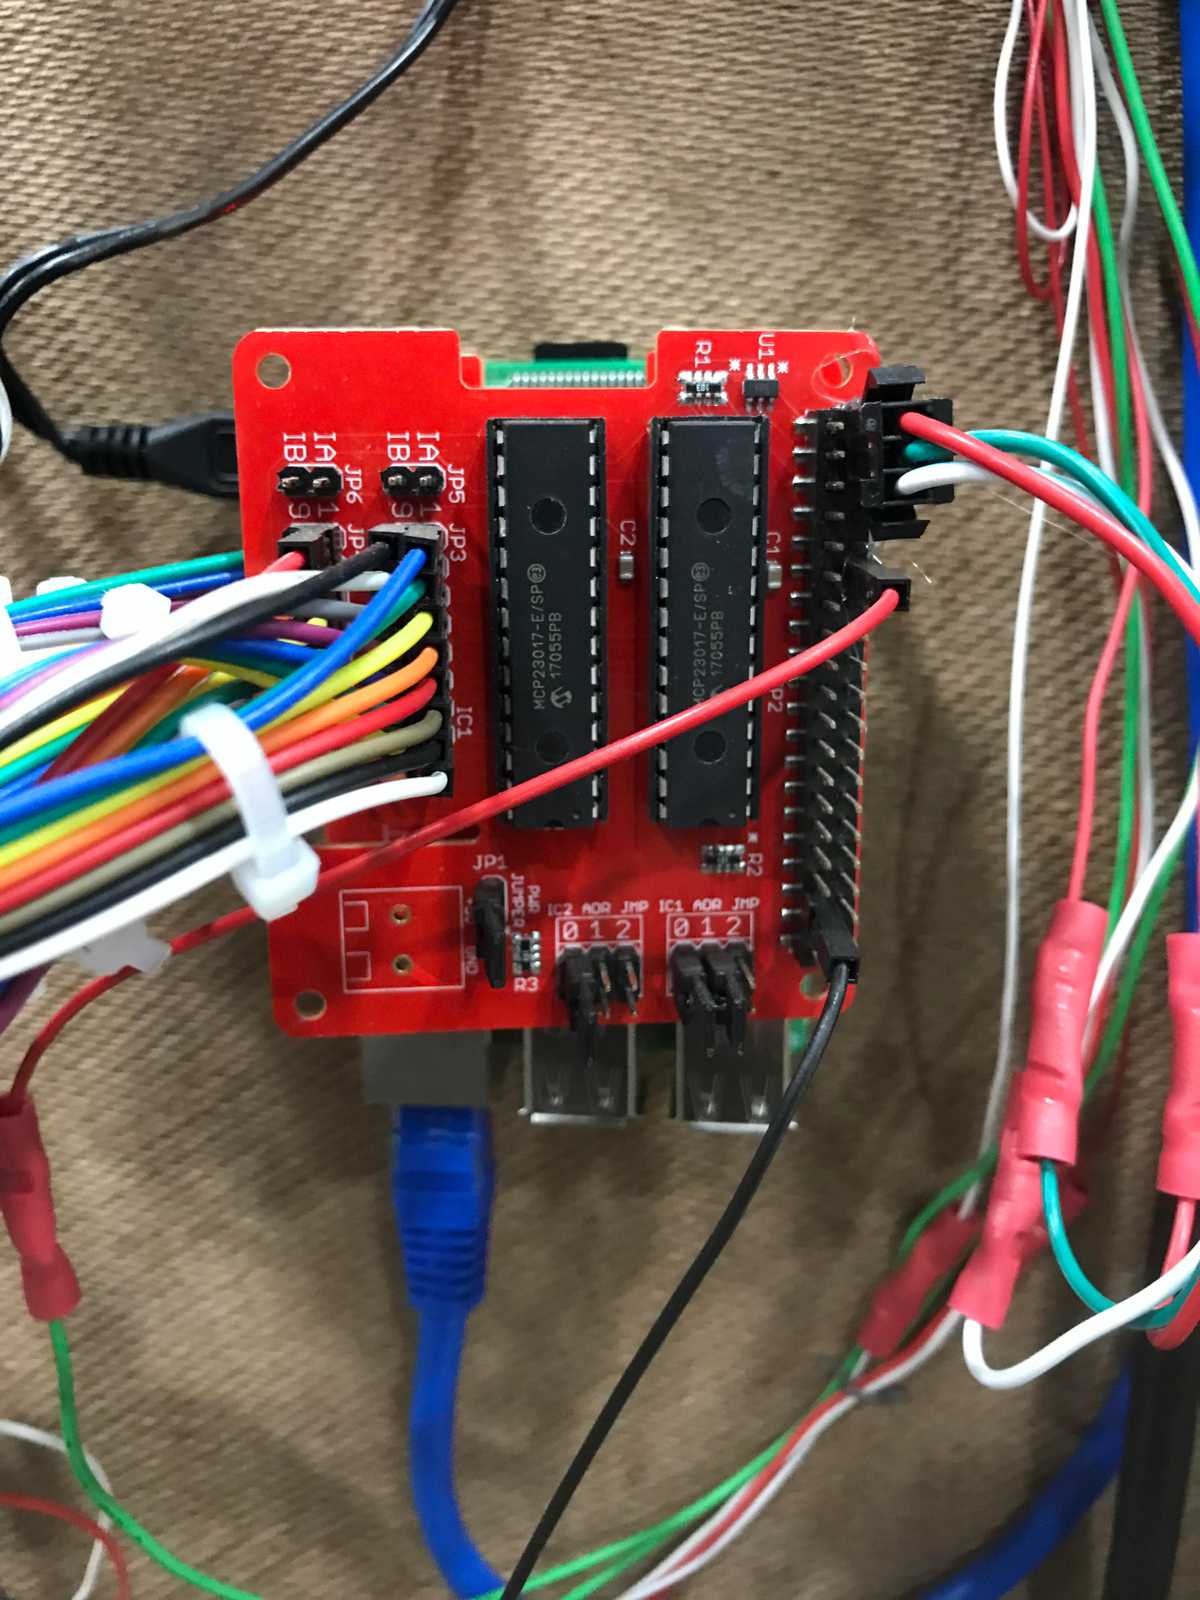 The MCP23017 HAT with everything plugged in